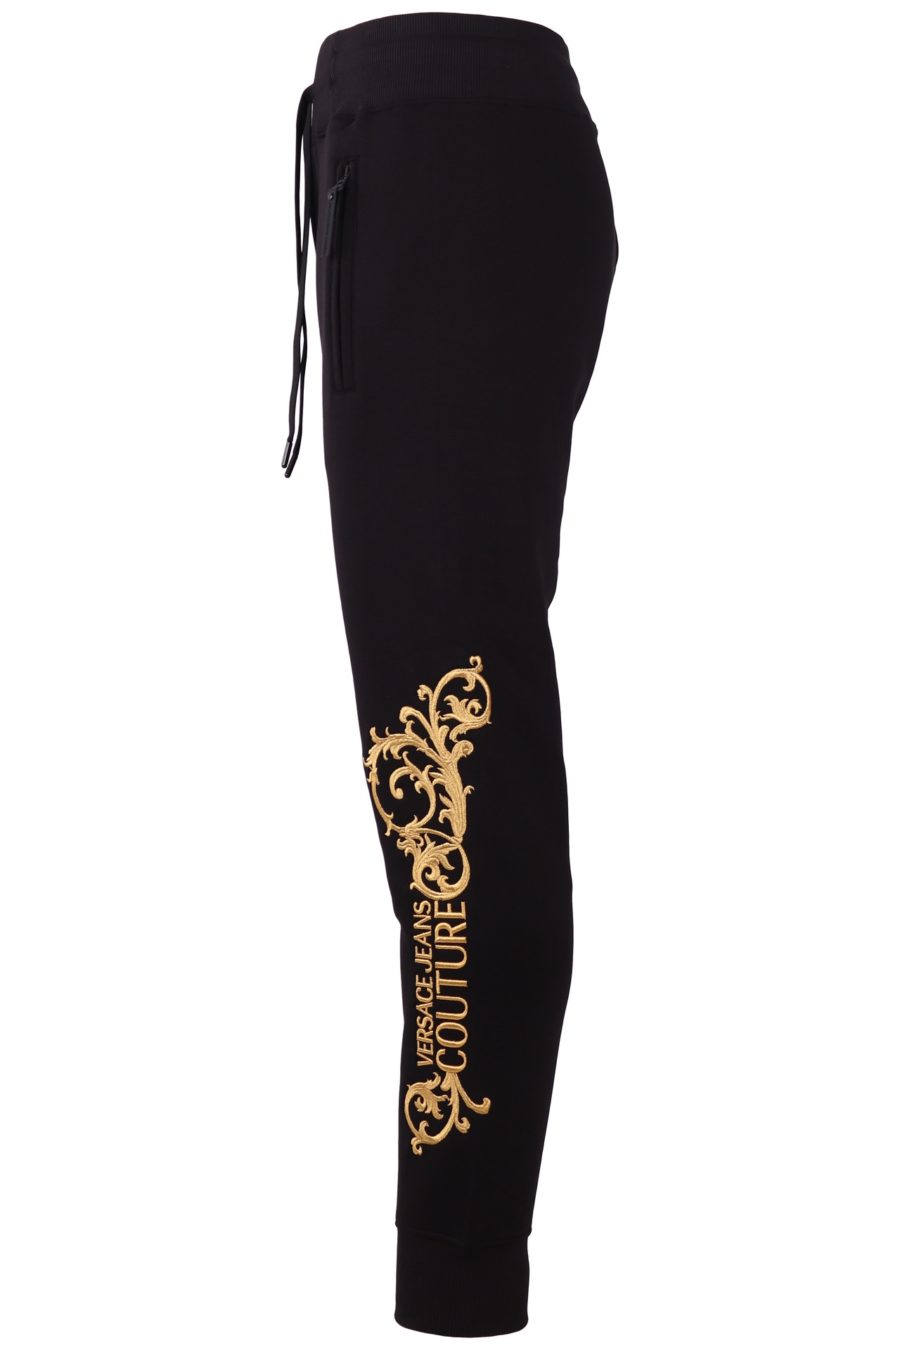 Tracksuit bottoms Versace Jeans Couture black with embroidered logo - 381bdd3285dbb41c149b6b1346cacf7d5881401a